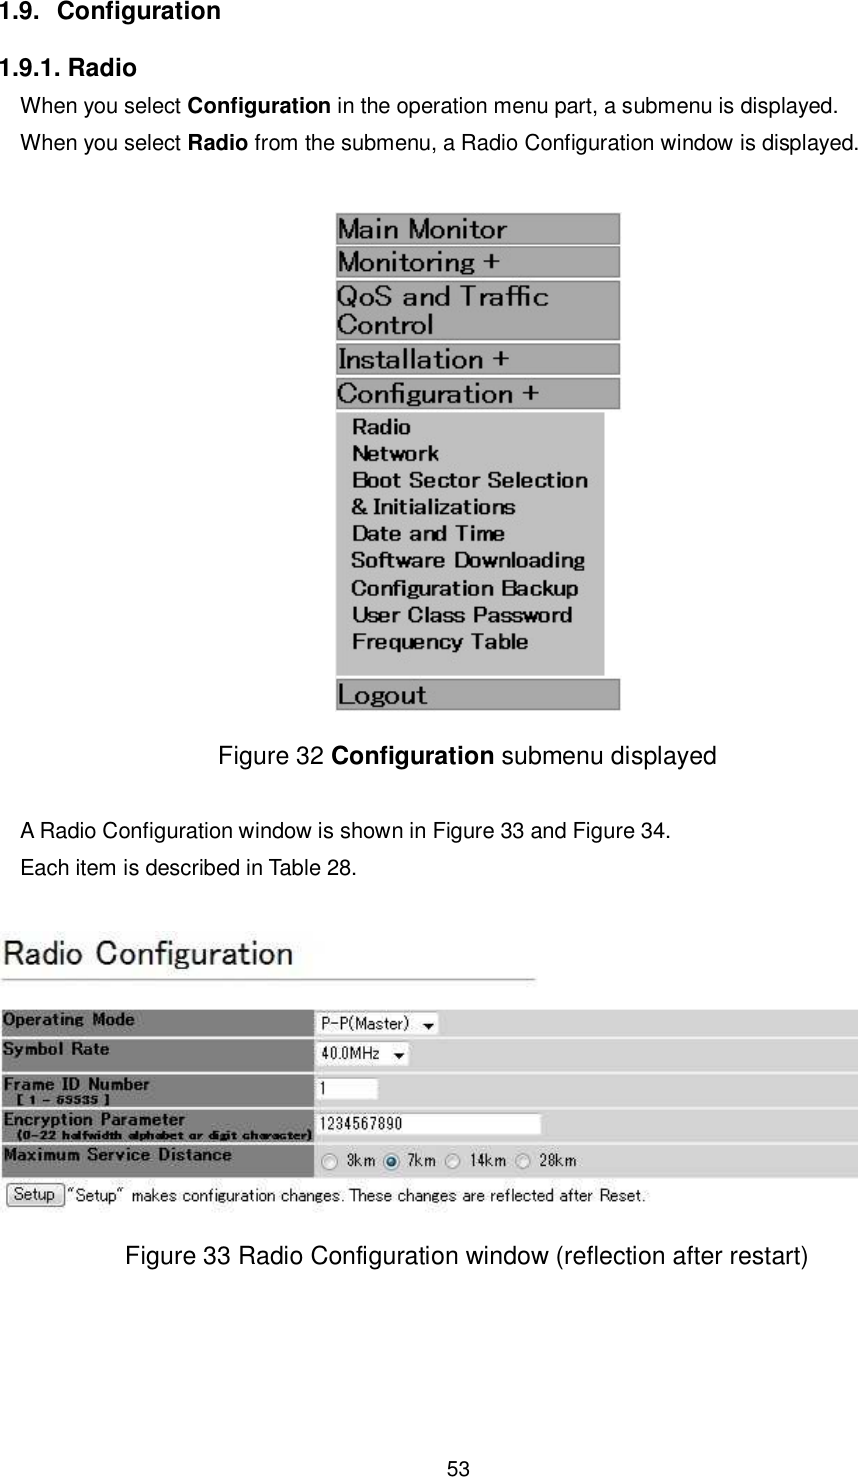    53  1.9.  Configuration 1.9.1. Radio When you select Configuration in the operation menu part, a submenu is displayed. When you select Radio from the submenu, a Radio Configuration window is displayed.   Figure 32 Configuration submenu displayed  A Radio Configuration window is shown in Figure 33 and Figure 34. Each item is described in Table 28.   Figure 33 Radio Configuration window (reflection after restart)  